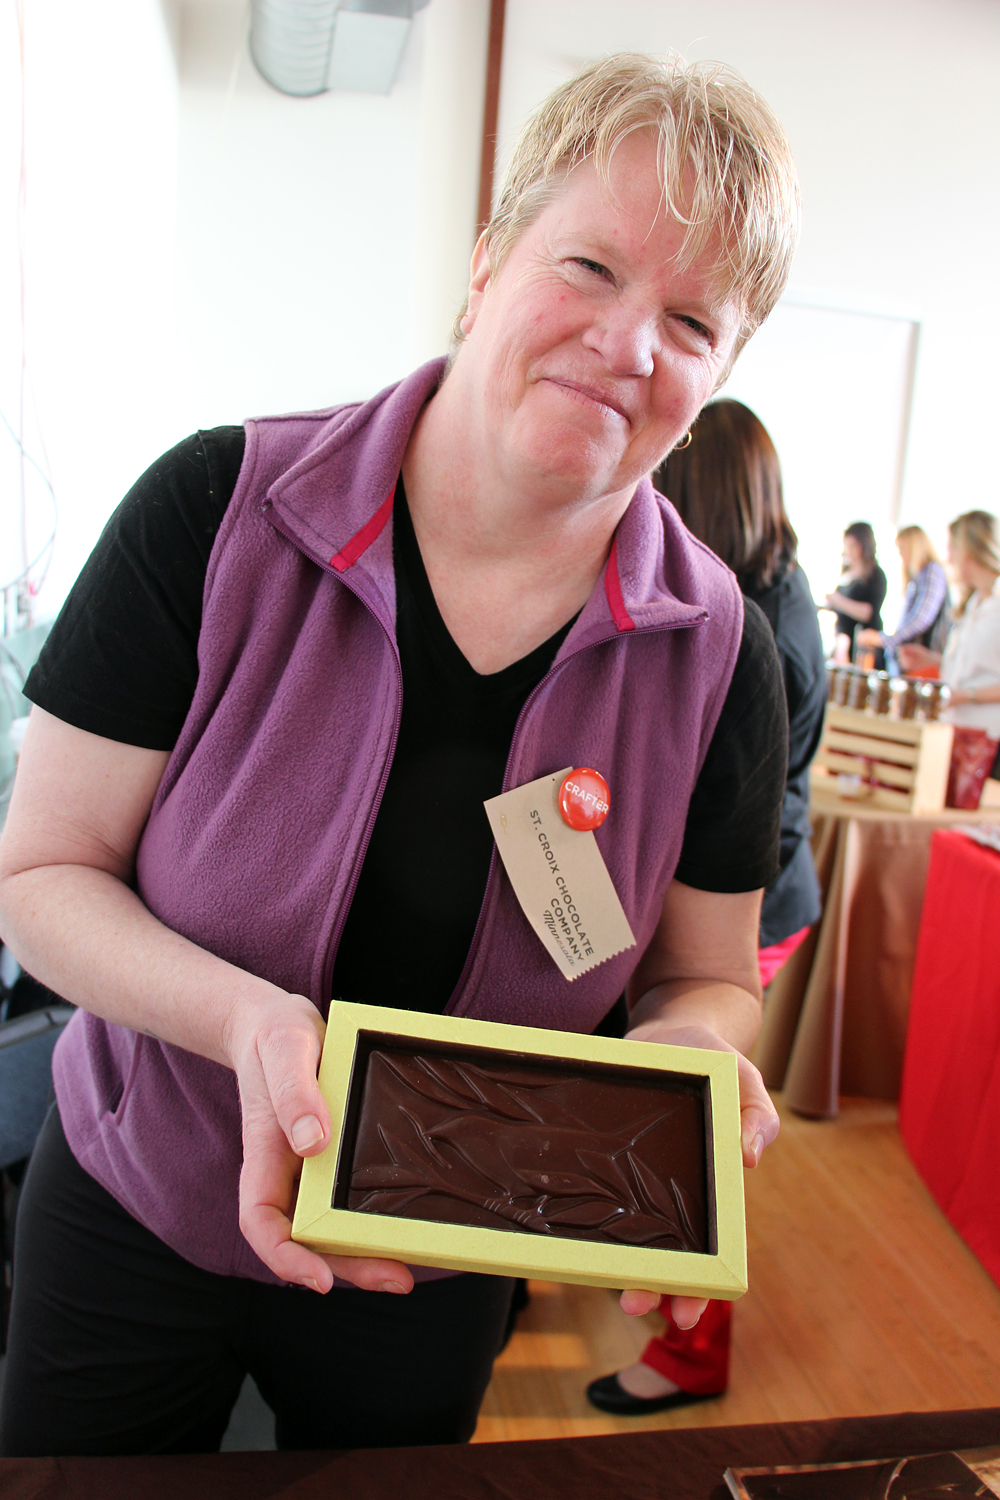 Head chocolatier Robyn Dochterman from St Croix Chocolate Company - Highlight: Special Edition Chocolate Bar. Photo: Wendy Goodfriend